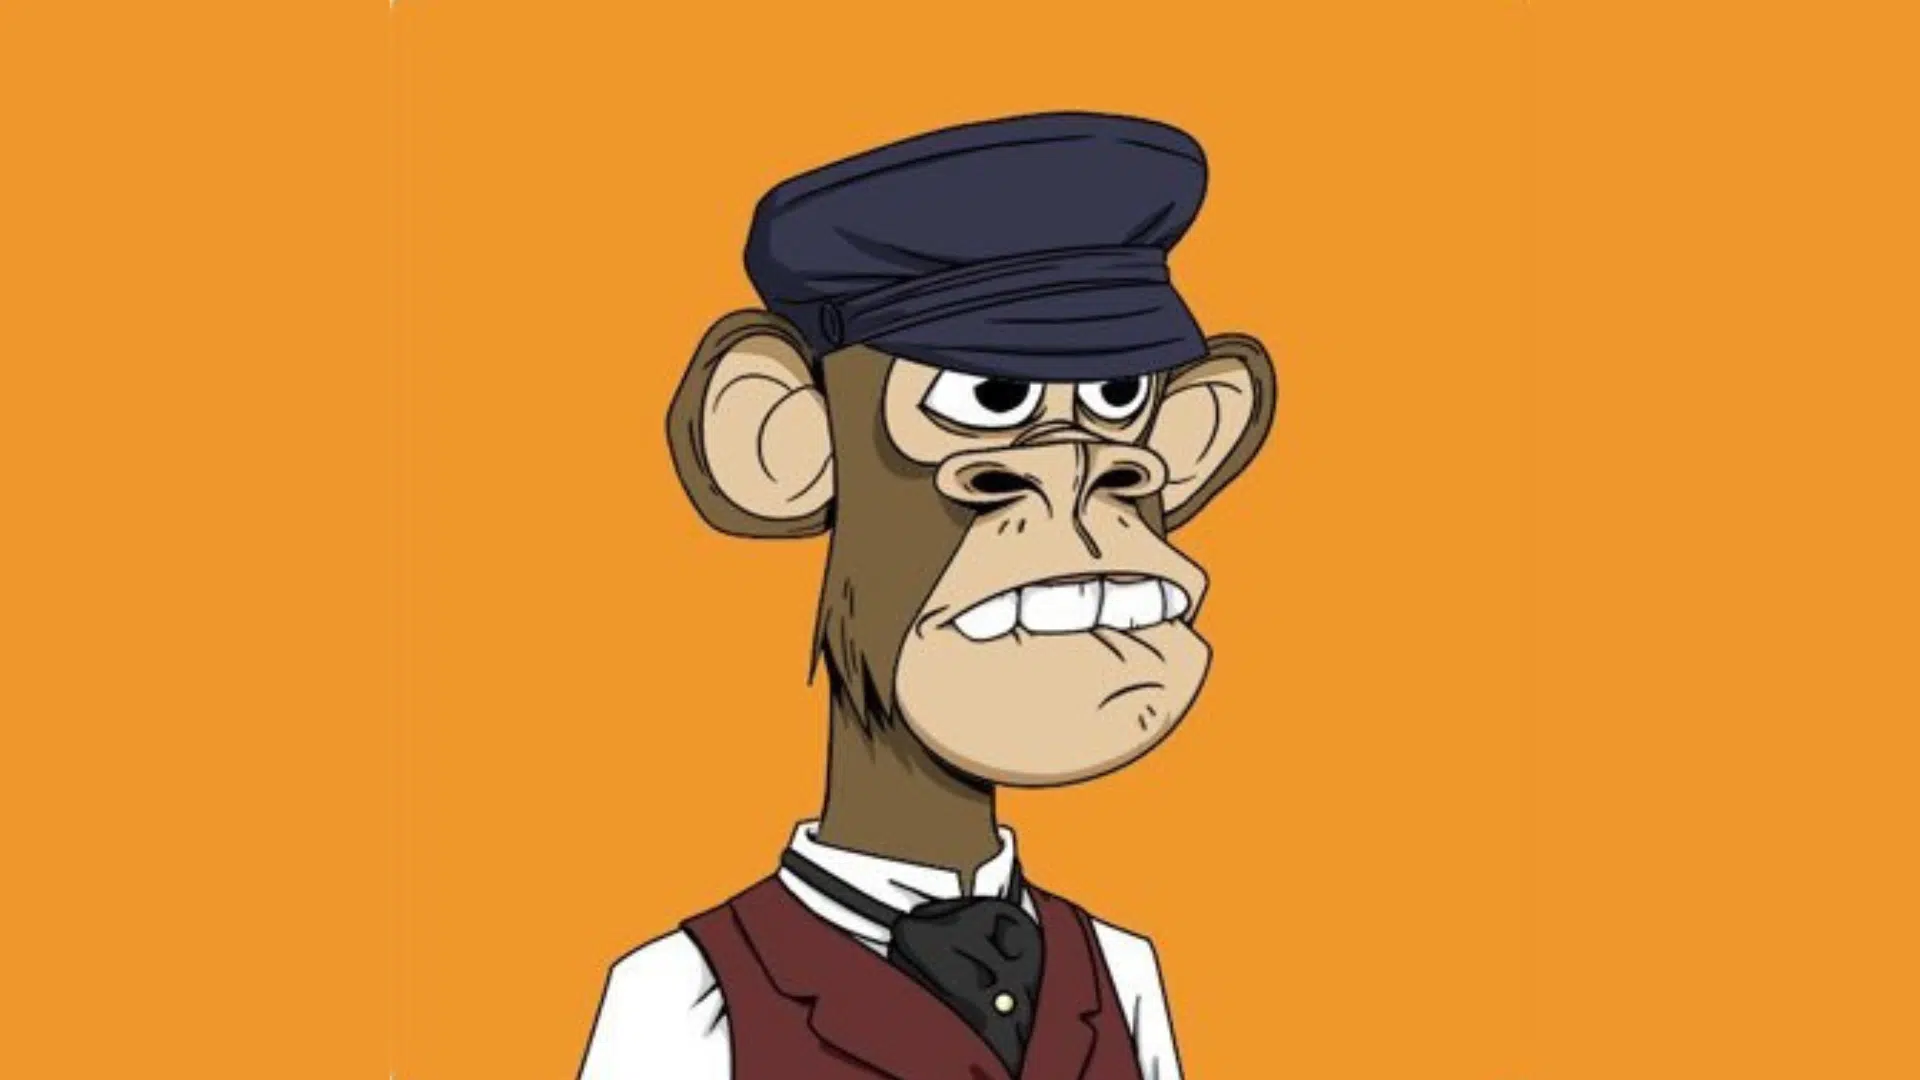 A picture of the Bored Ape Yacht Club NFT/character "Jenkins The Valet"